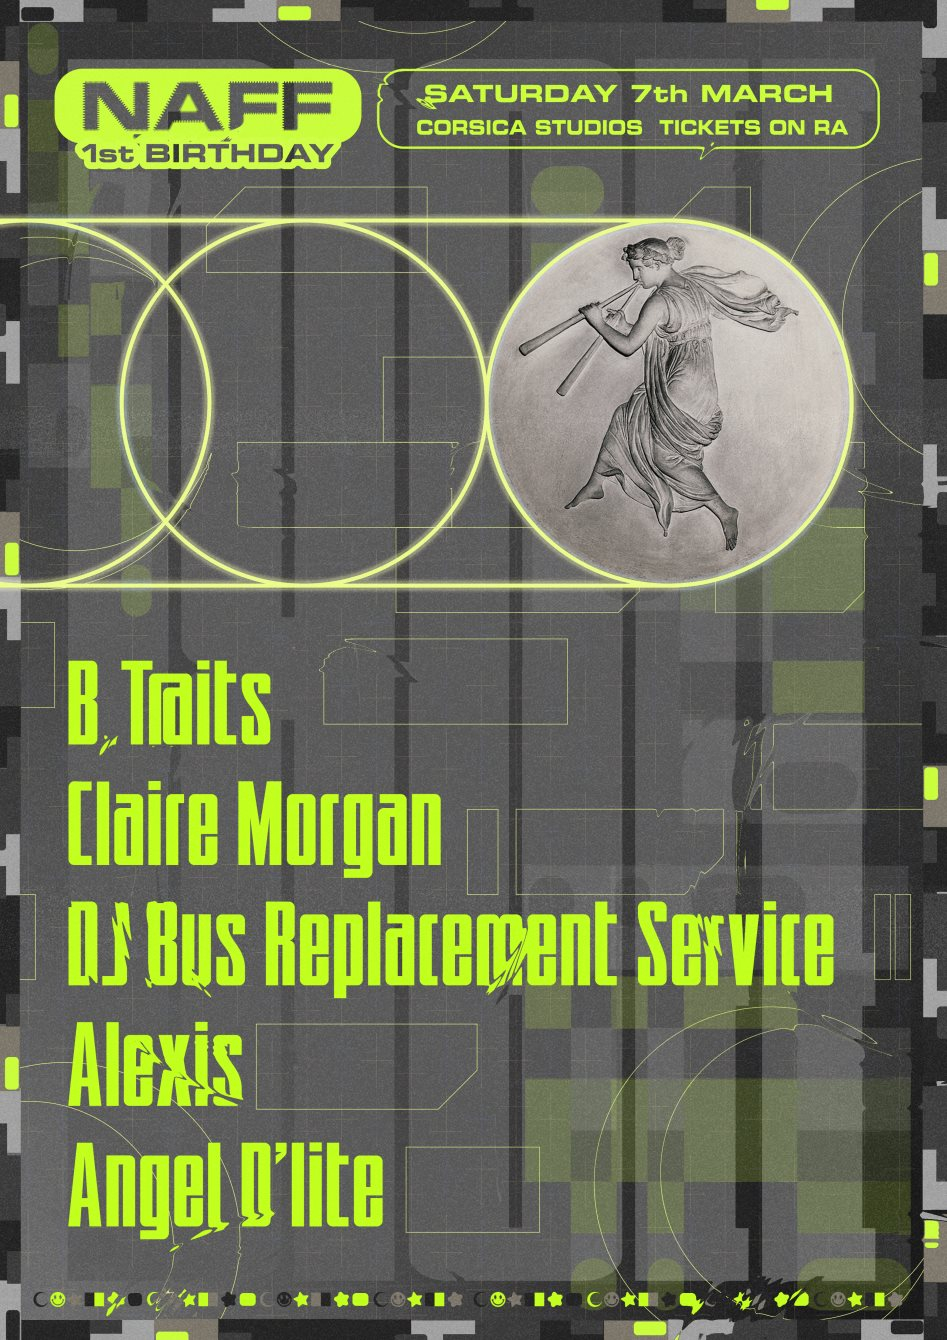 NAFF's 1st Birthday with B.Traits, Claire Morgan & More - Flyer front